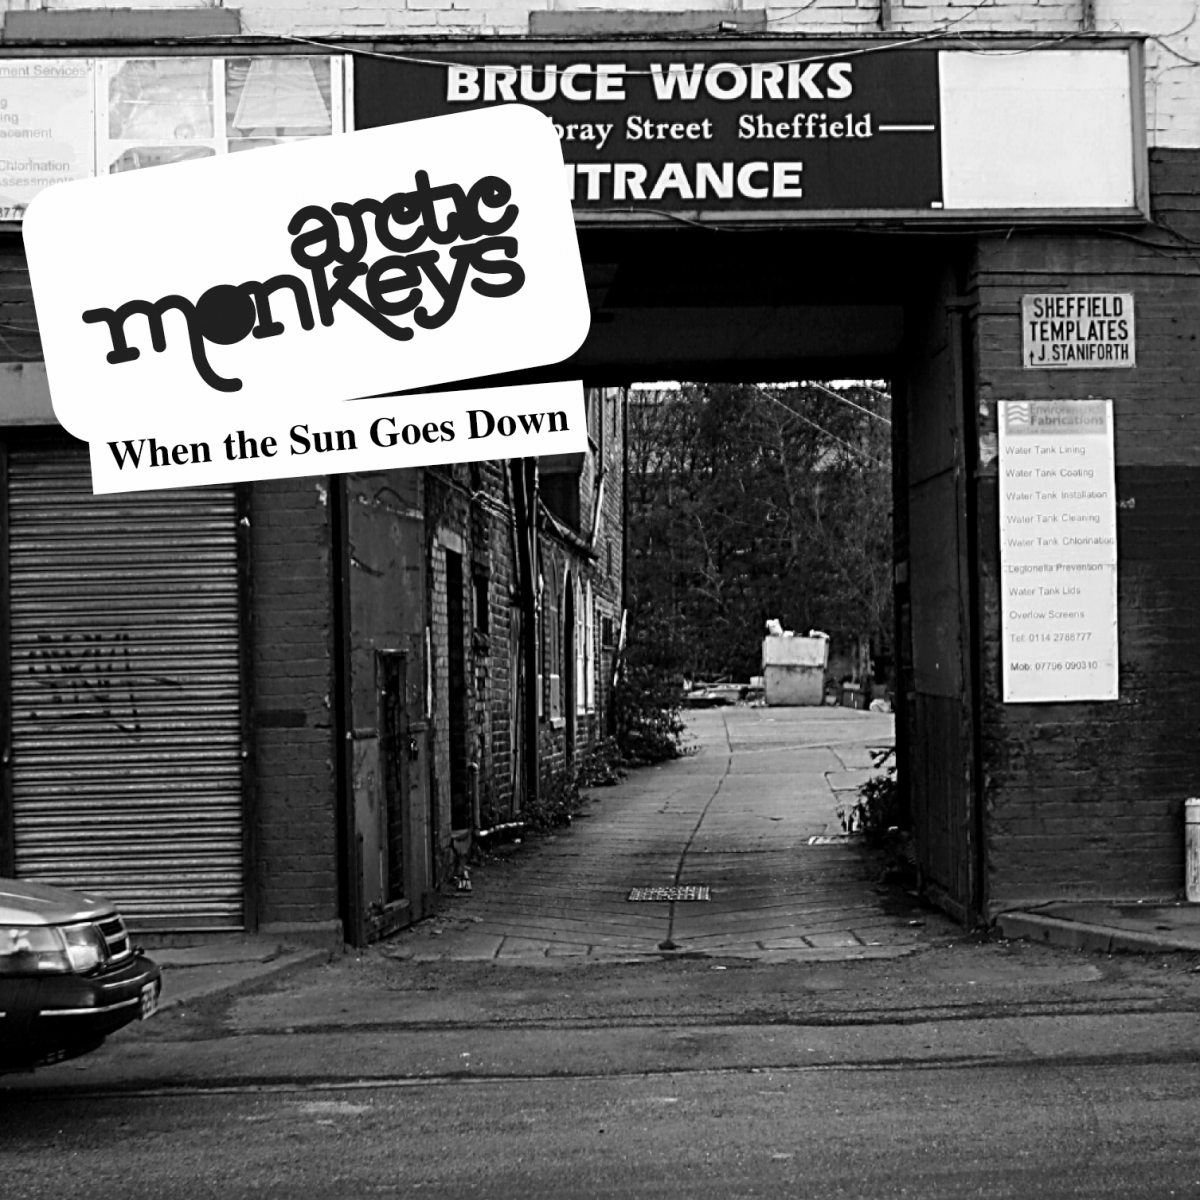 Arctic Monkeys 'When The Sun Goes Down' single cover - Sheffield location